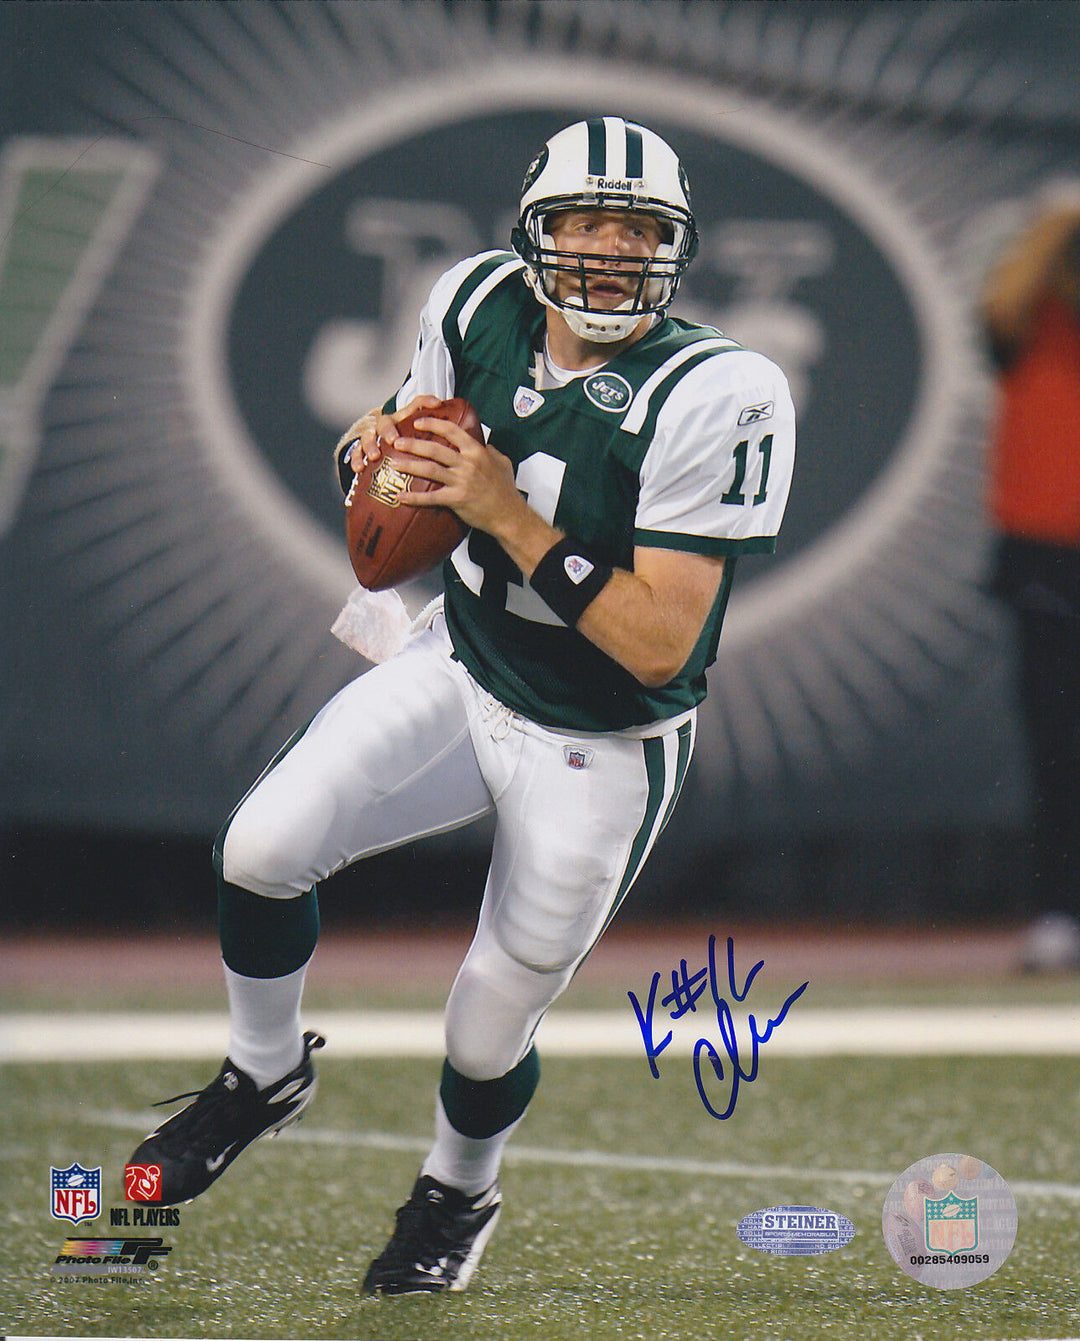 KELLEN CLEMENS SIGNED 8x10 NY JETS ST LOUIS RAMS SAN DIEGO CHARGERS STEINER COA Image 1